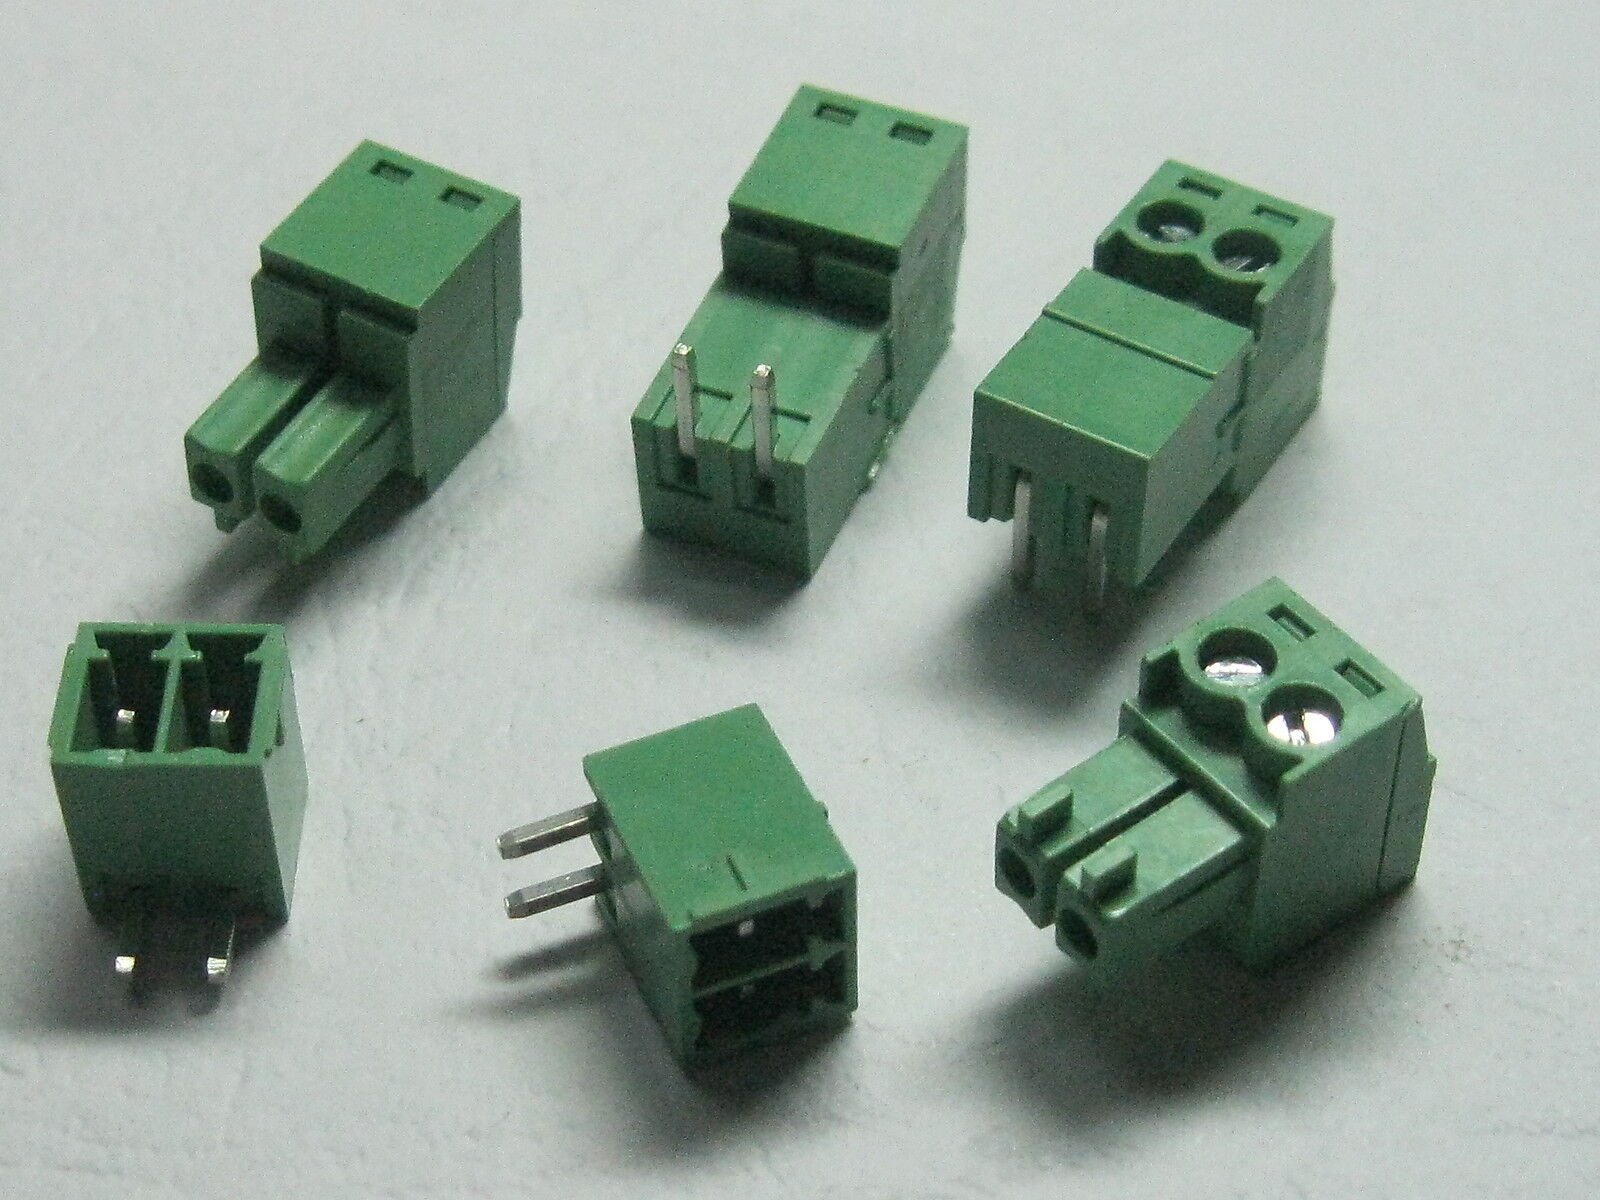 20 pcs Angle 2 pin Pitch 3.81mm Screw Terminal Block Connector Plugable Type New CY Does Not Apply